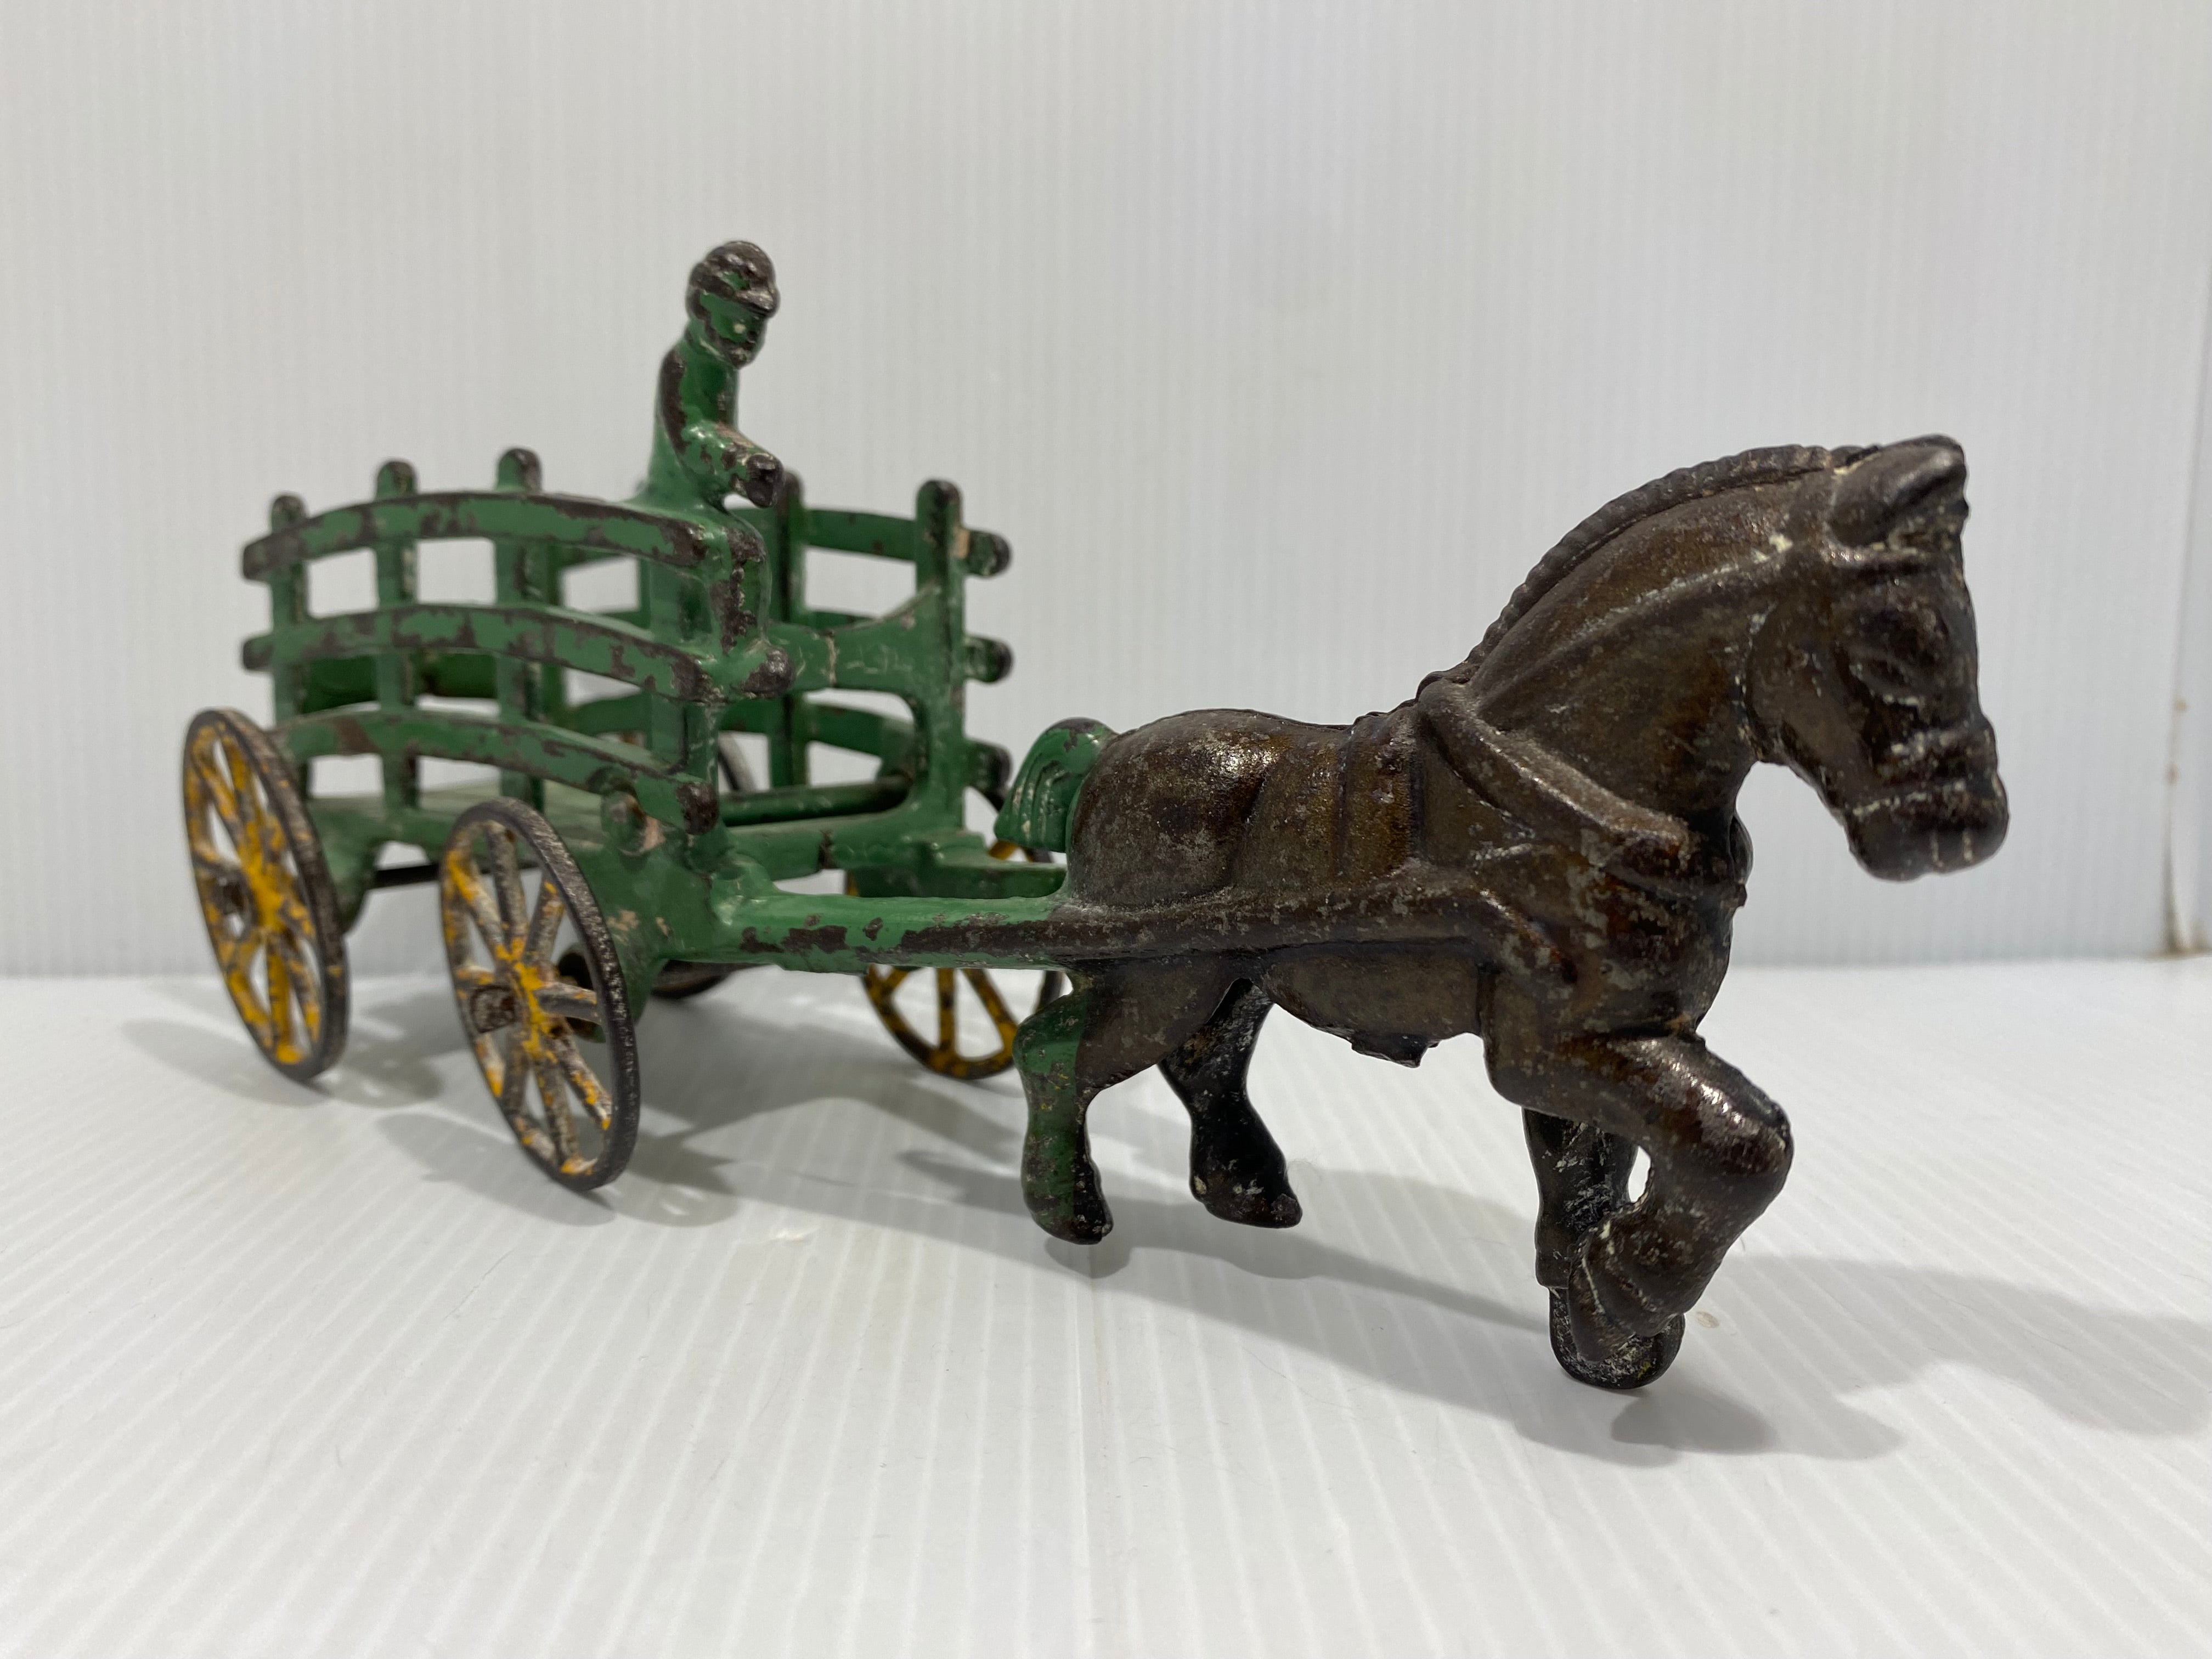 Original Green, stake wagons with cast in drivers. No cracks or repairs.